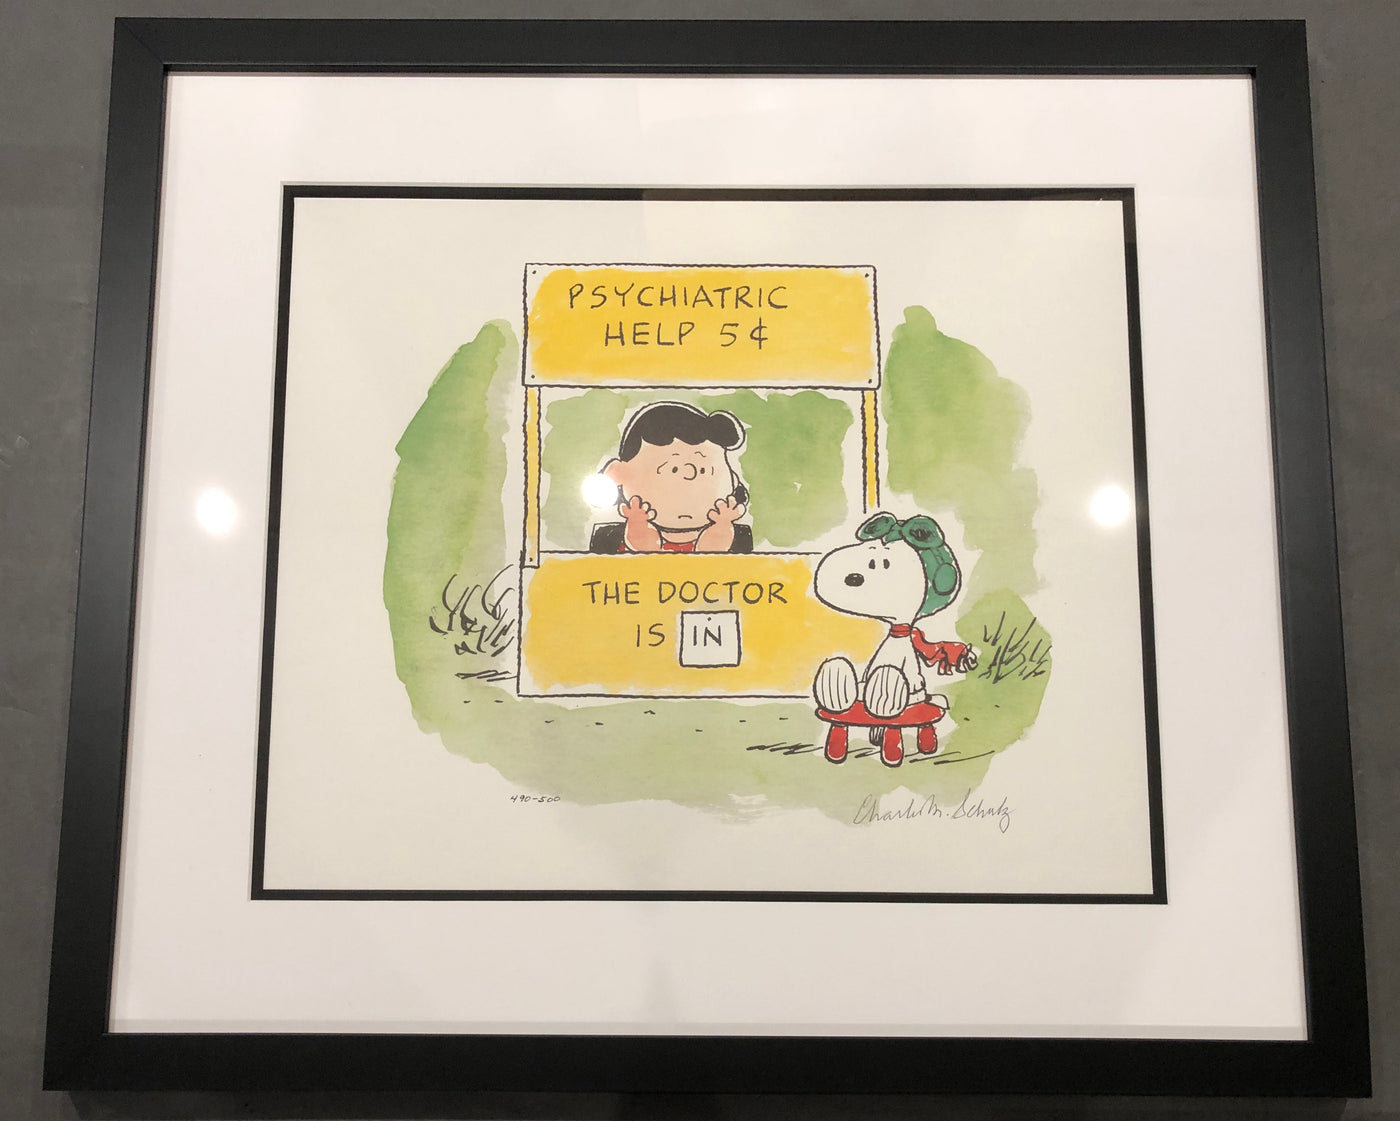 Charles Schulz Signed Lithograph, Five Cents, Please